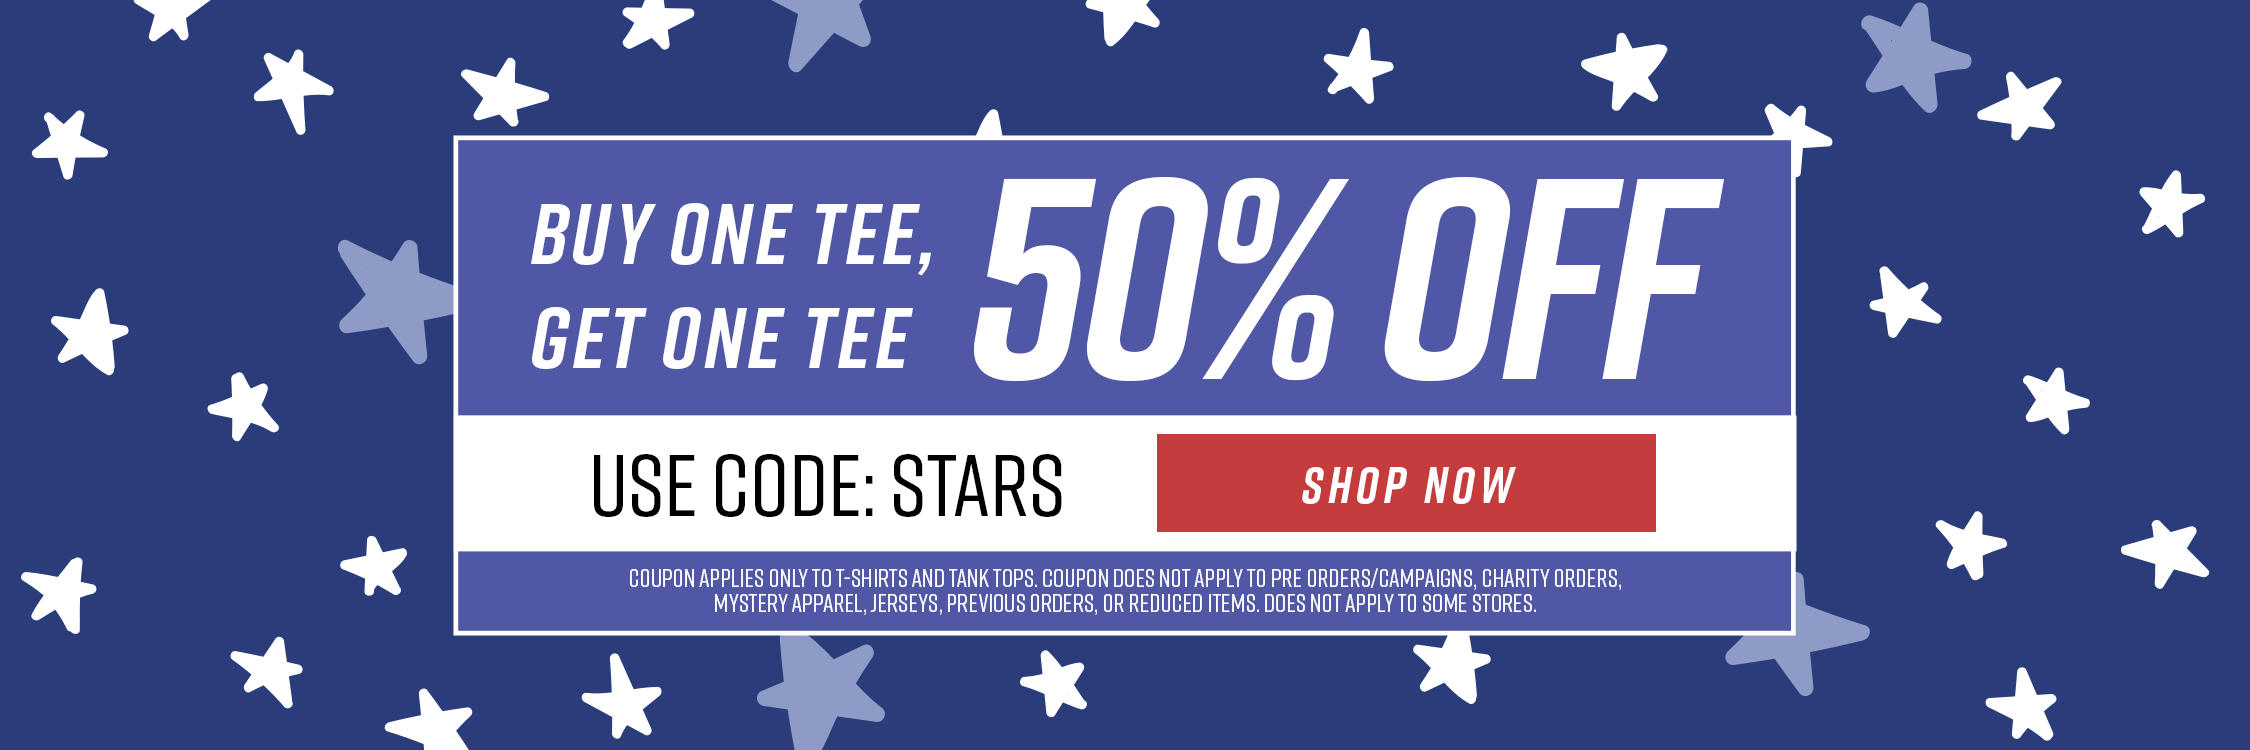 Last Day! Buy One Tee, Get One 50% Off. Code STARS. Shop Now. Exclusions apply. white and blue stars